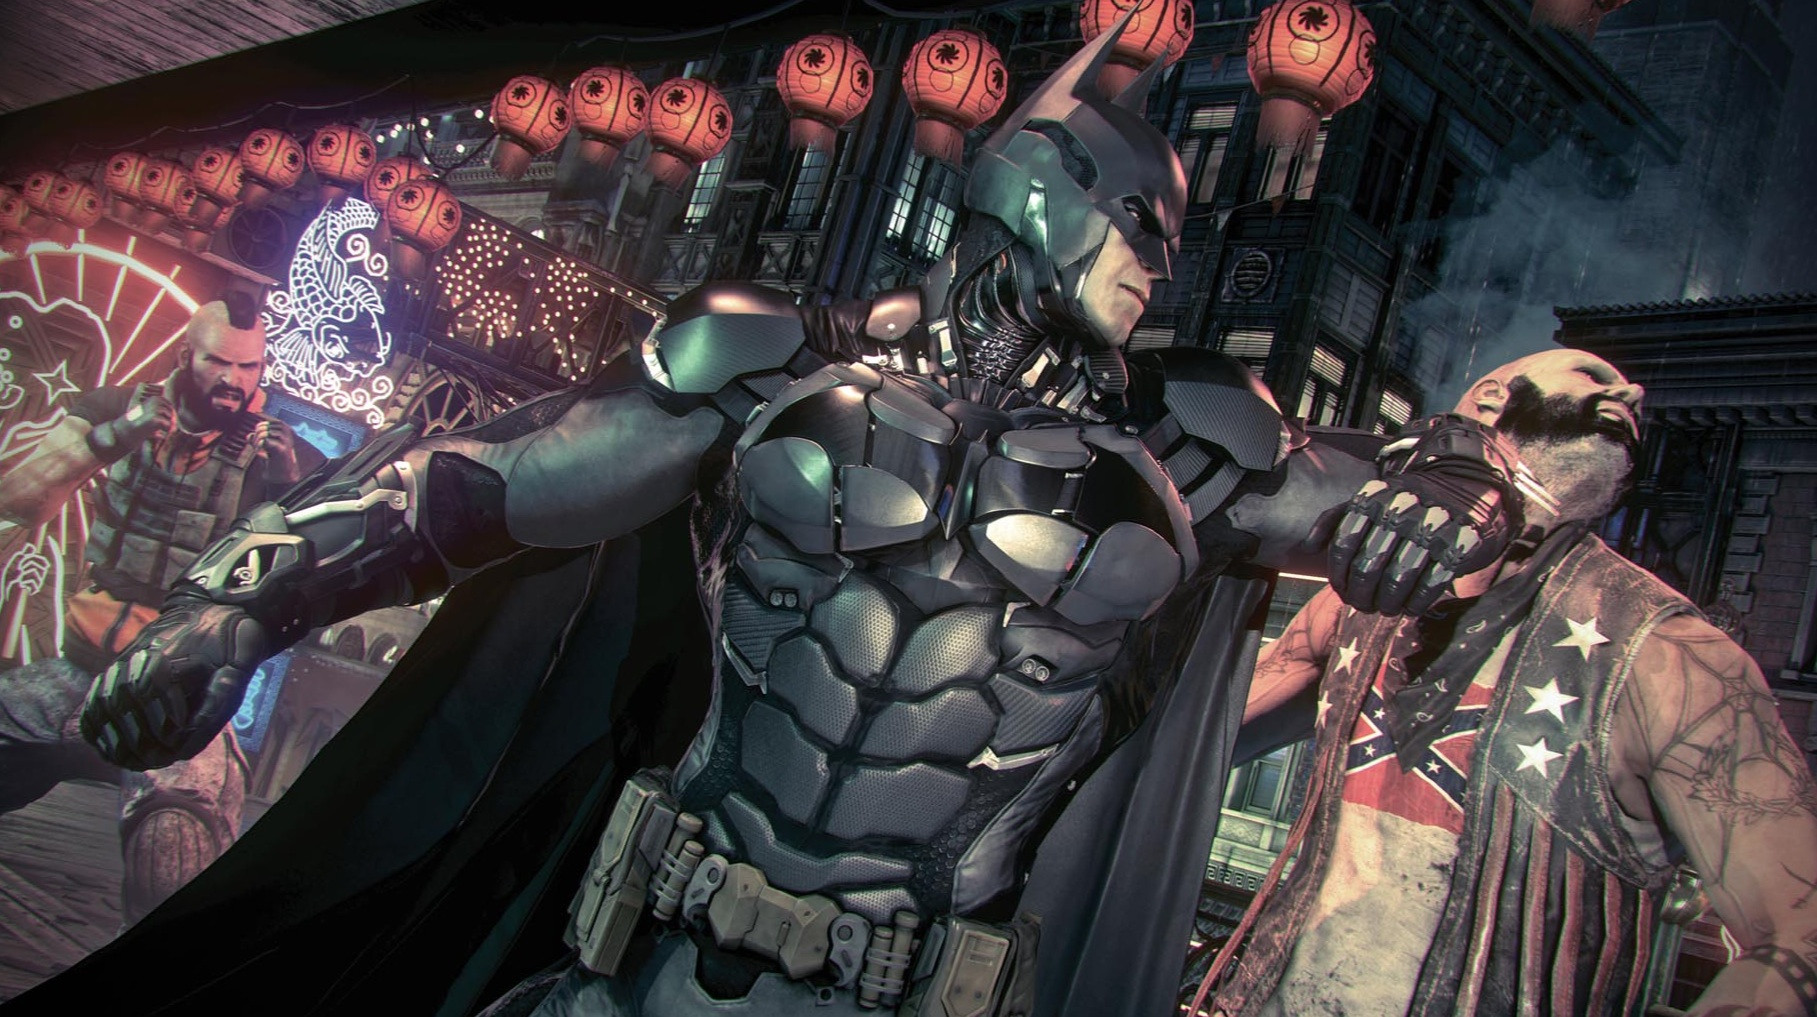 ESRB States Why “Batman: Arkham Knight” Is Rated M - Watch Out Batman; It's Going to Be a Bad Day for Many